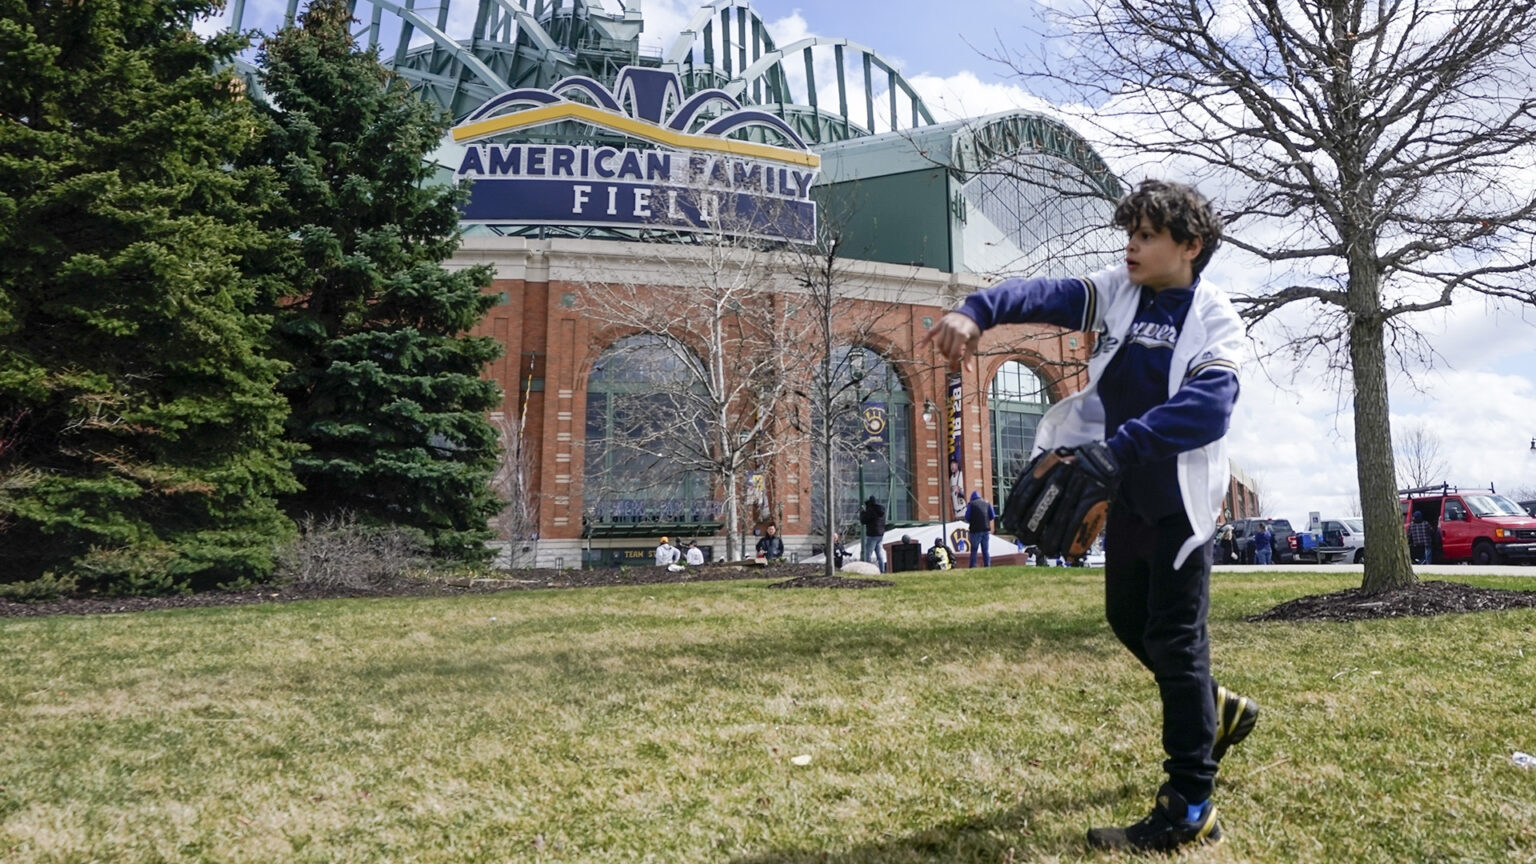 Lennon Jones throws with his right arm while standing on a lawn with several trees and the American Family Field sign on the Milwaukee Brewers stadium in the background.